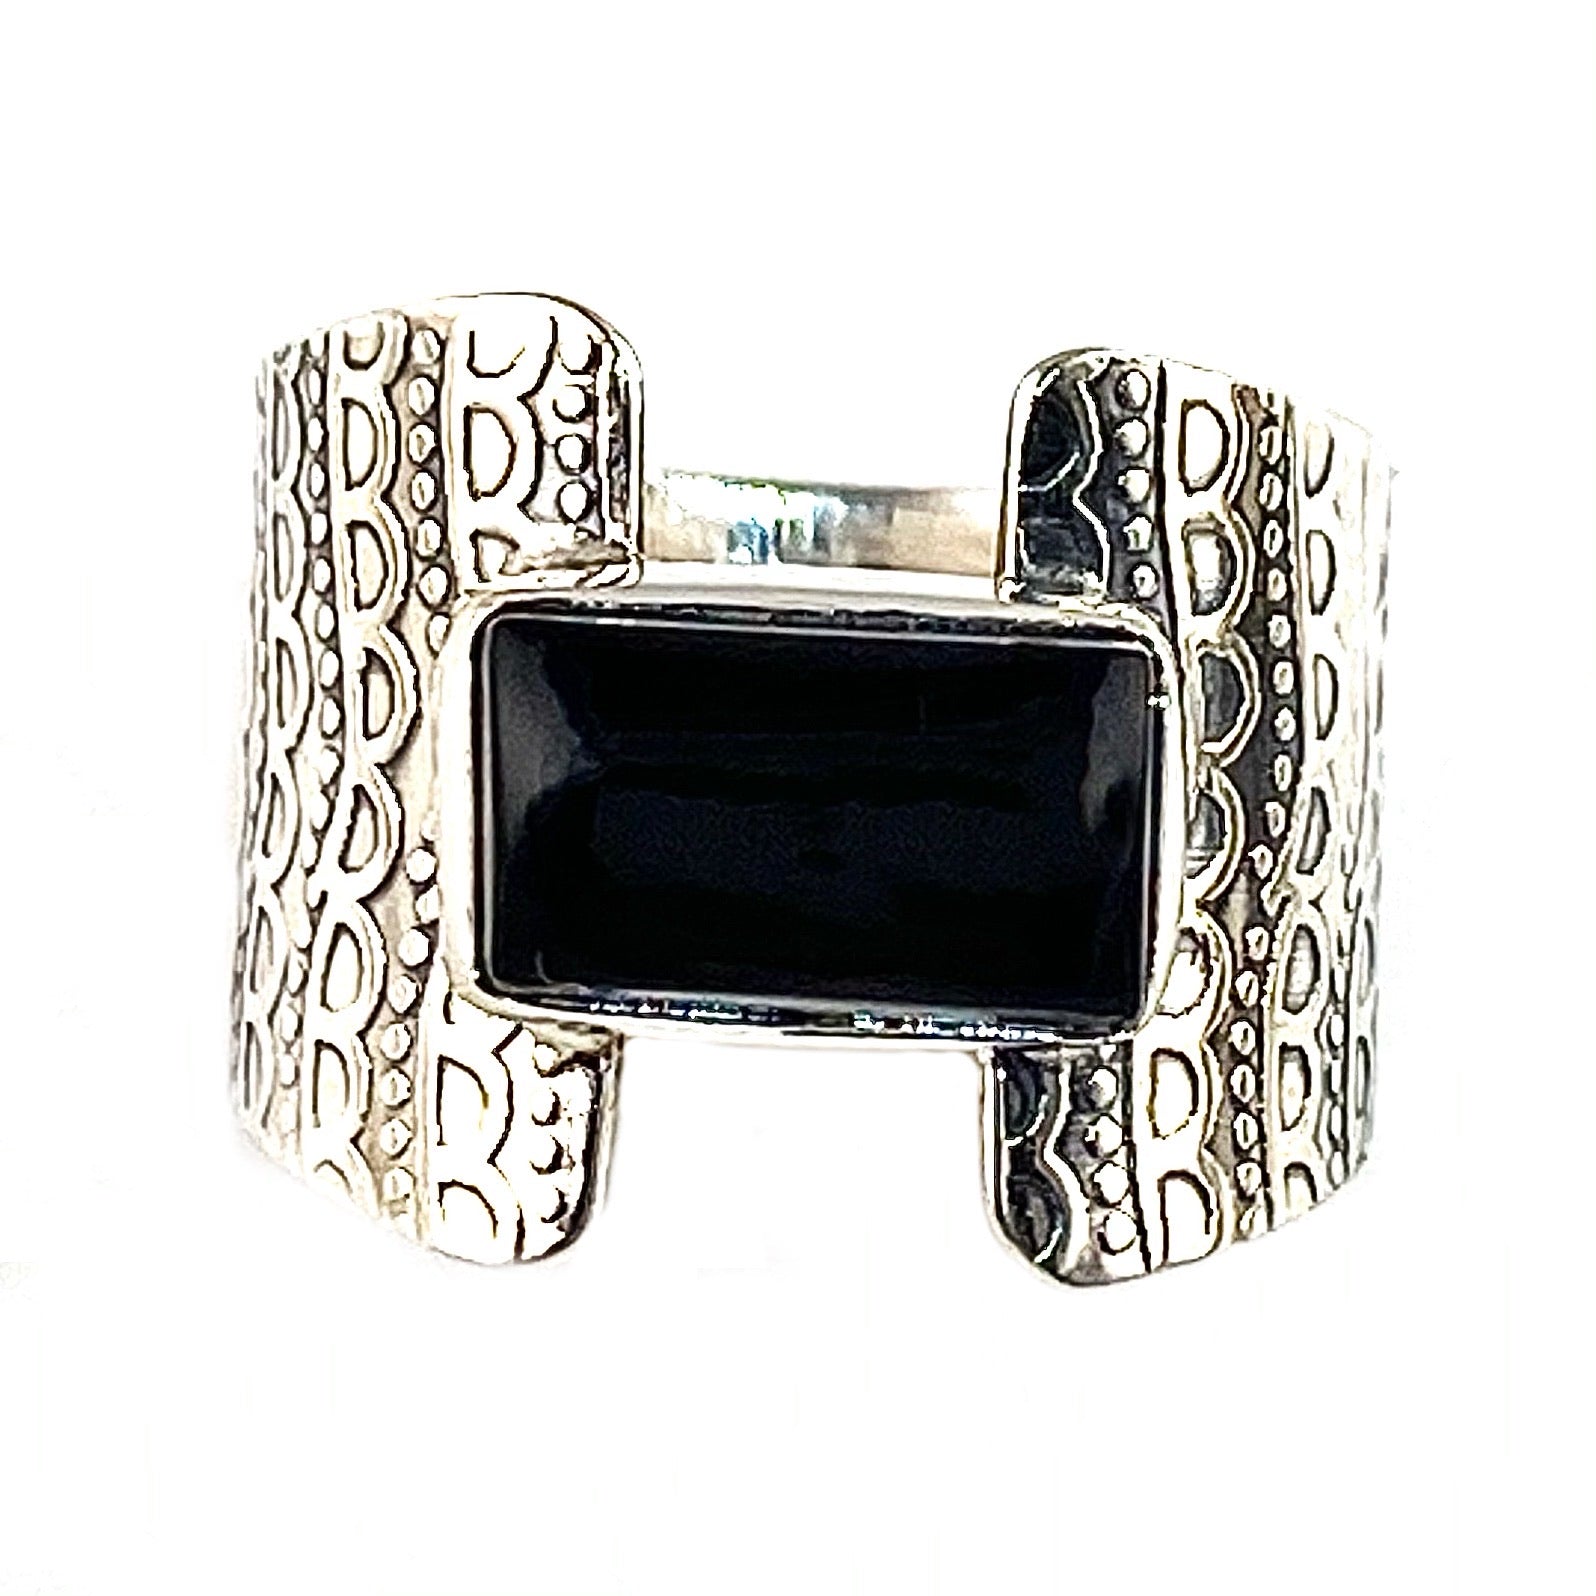 Black Onyx Sterling Silver Connection Ring - Keja Designs Jewelry